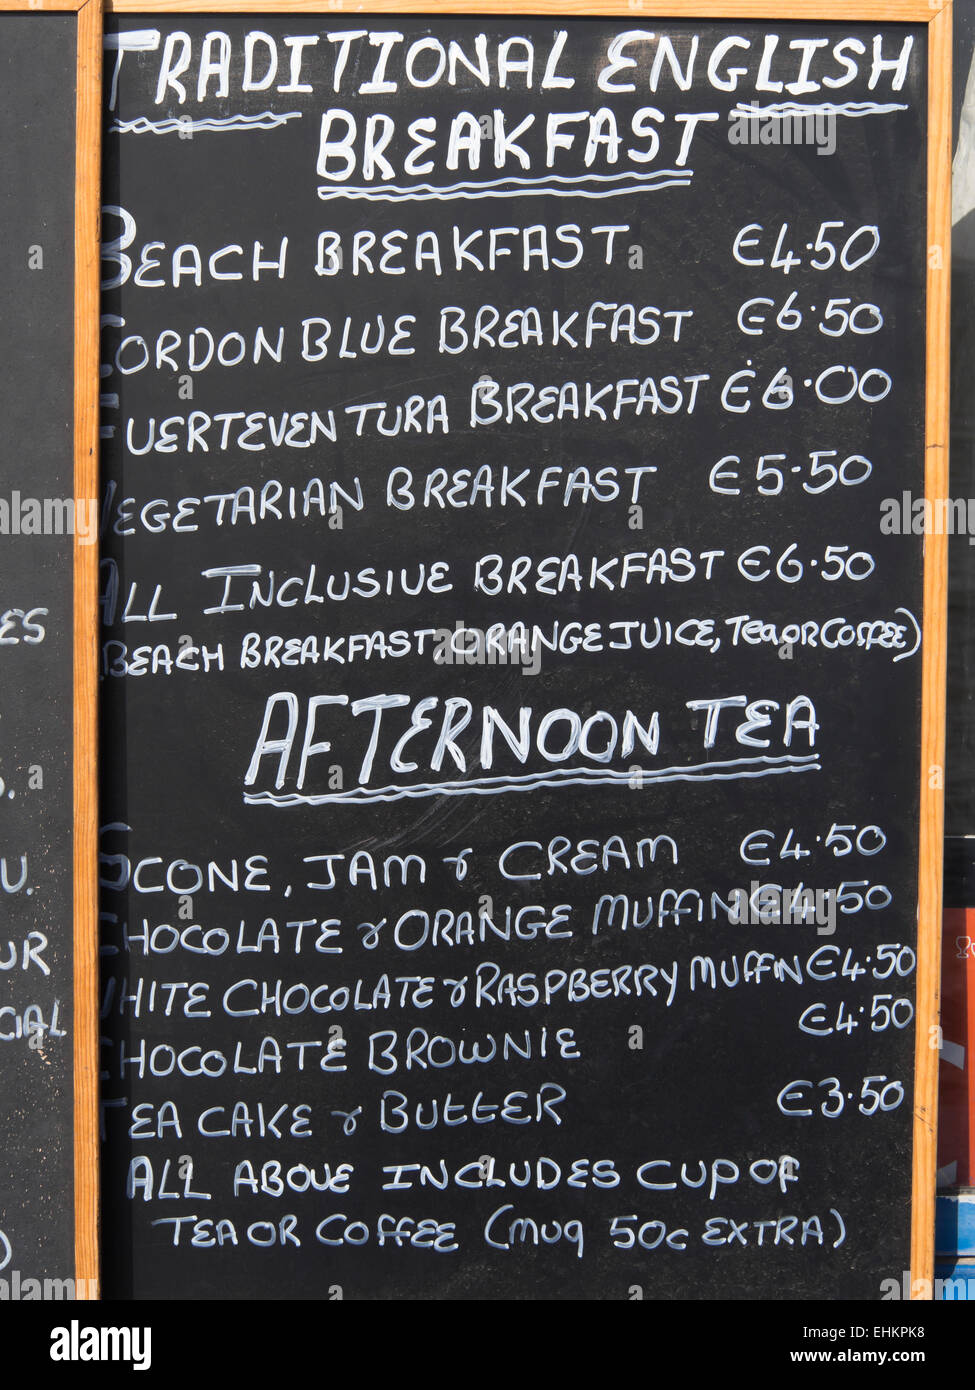 Blackboard and chalk menu for the Brits Traditional English breakfast and Afternoon tea in Fuerteventura, Canary islands Spain Stock Photo